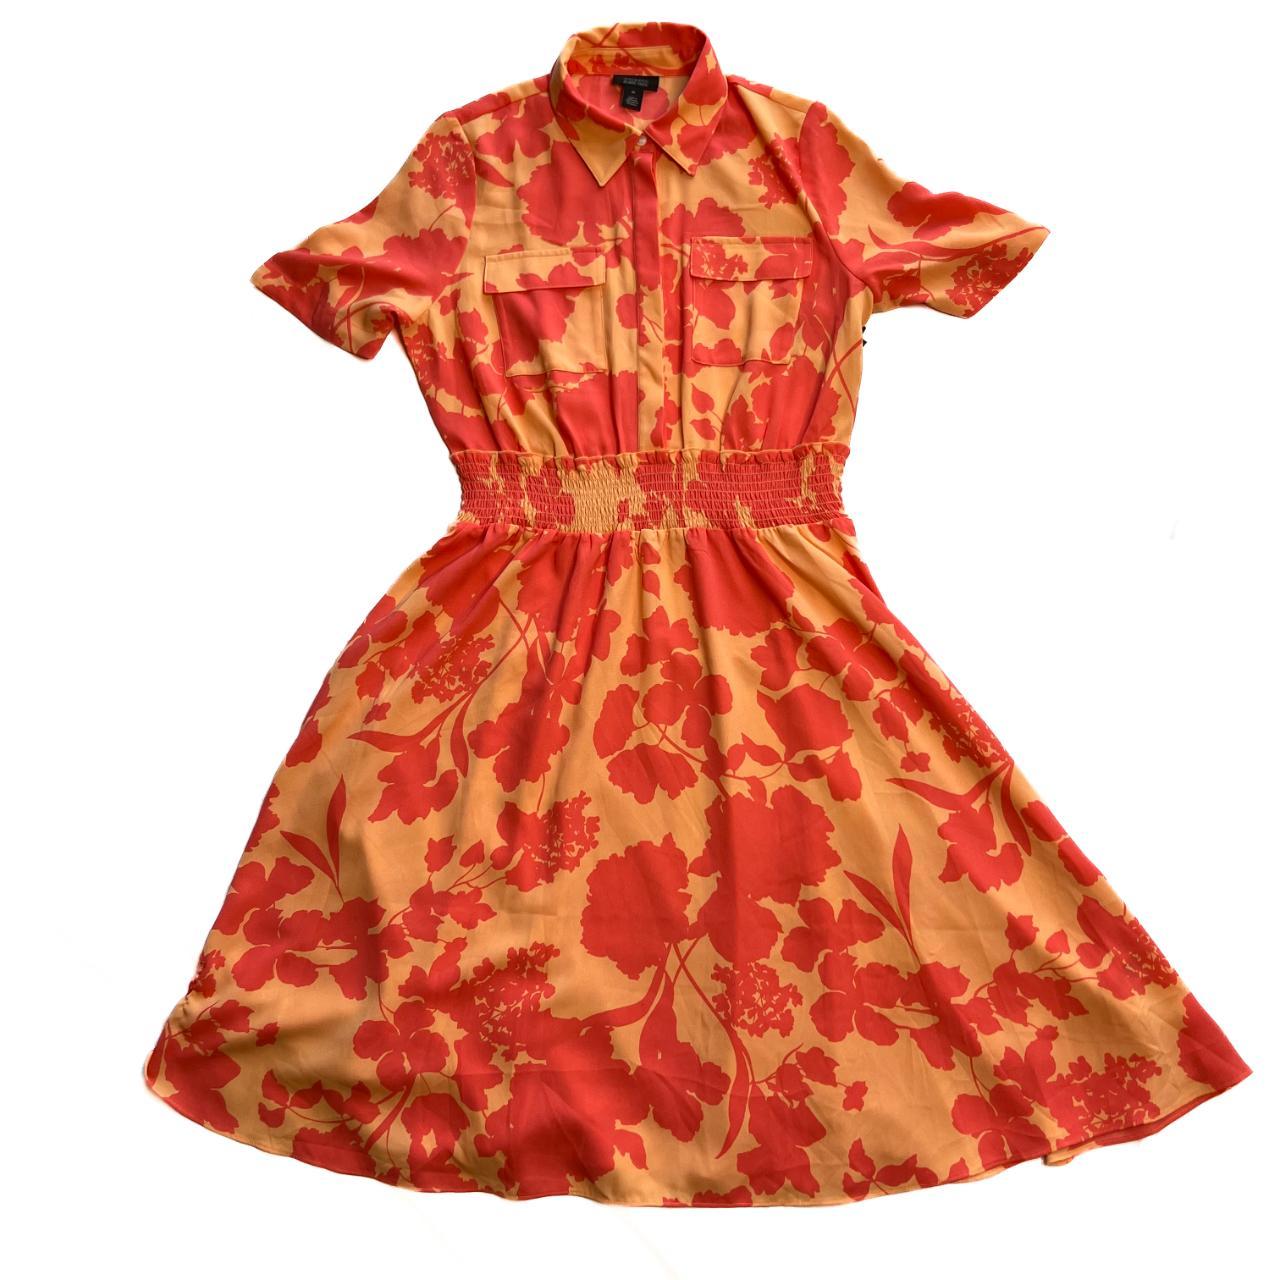 Product Image 1 - Retro Floral Dress

Bright dress is